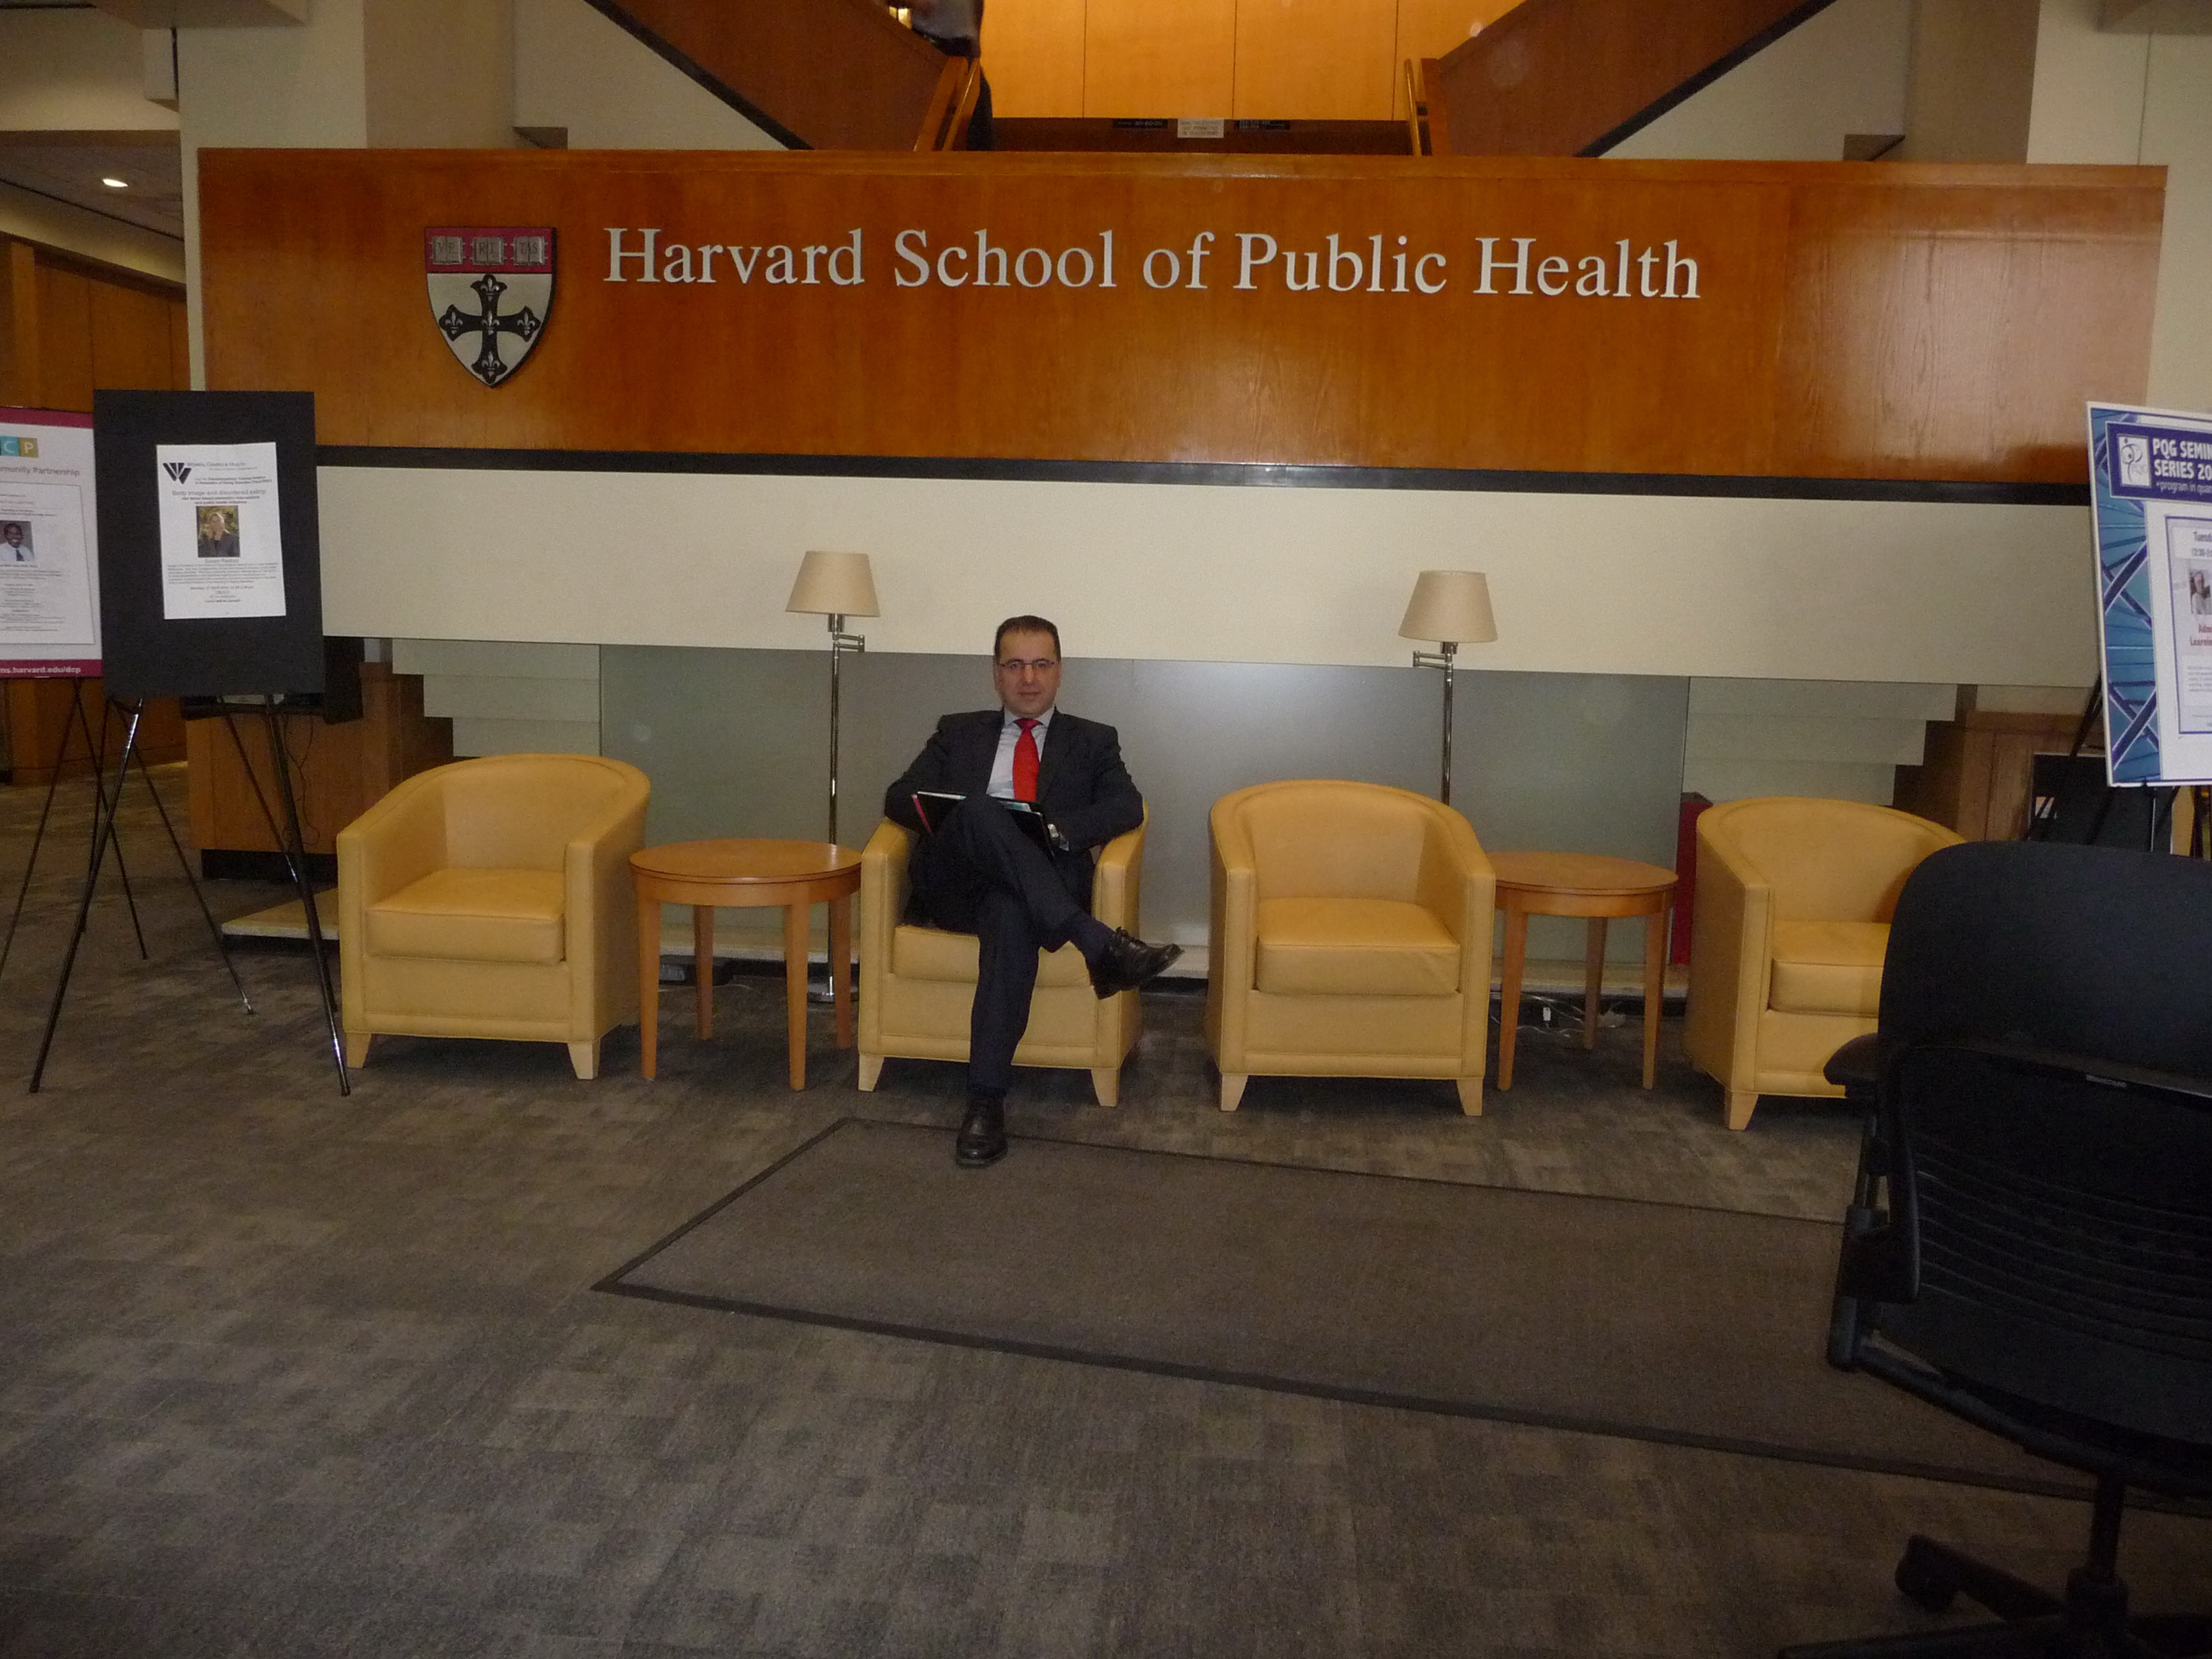 Many lectures at Harvard School of Public Health